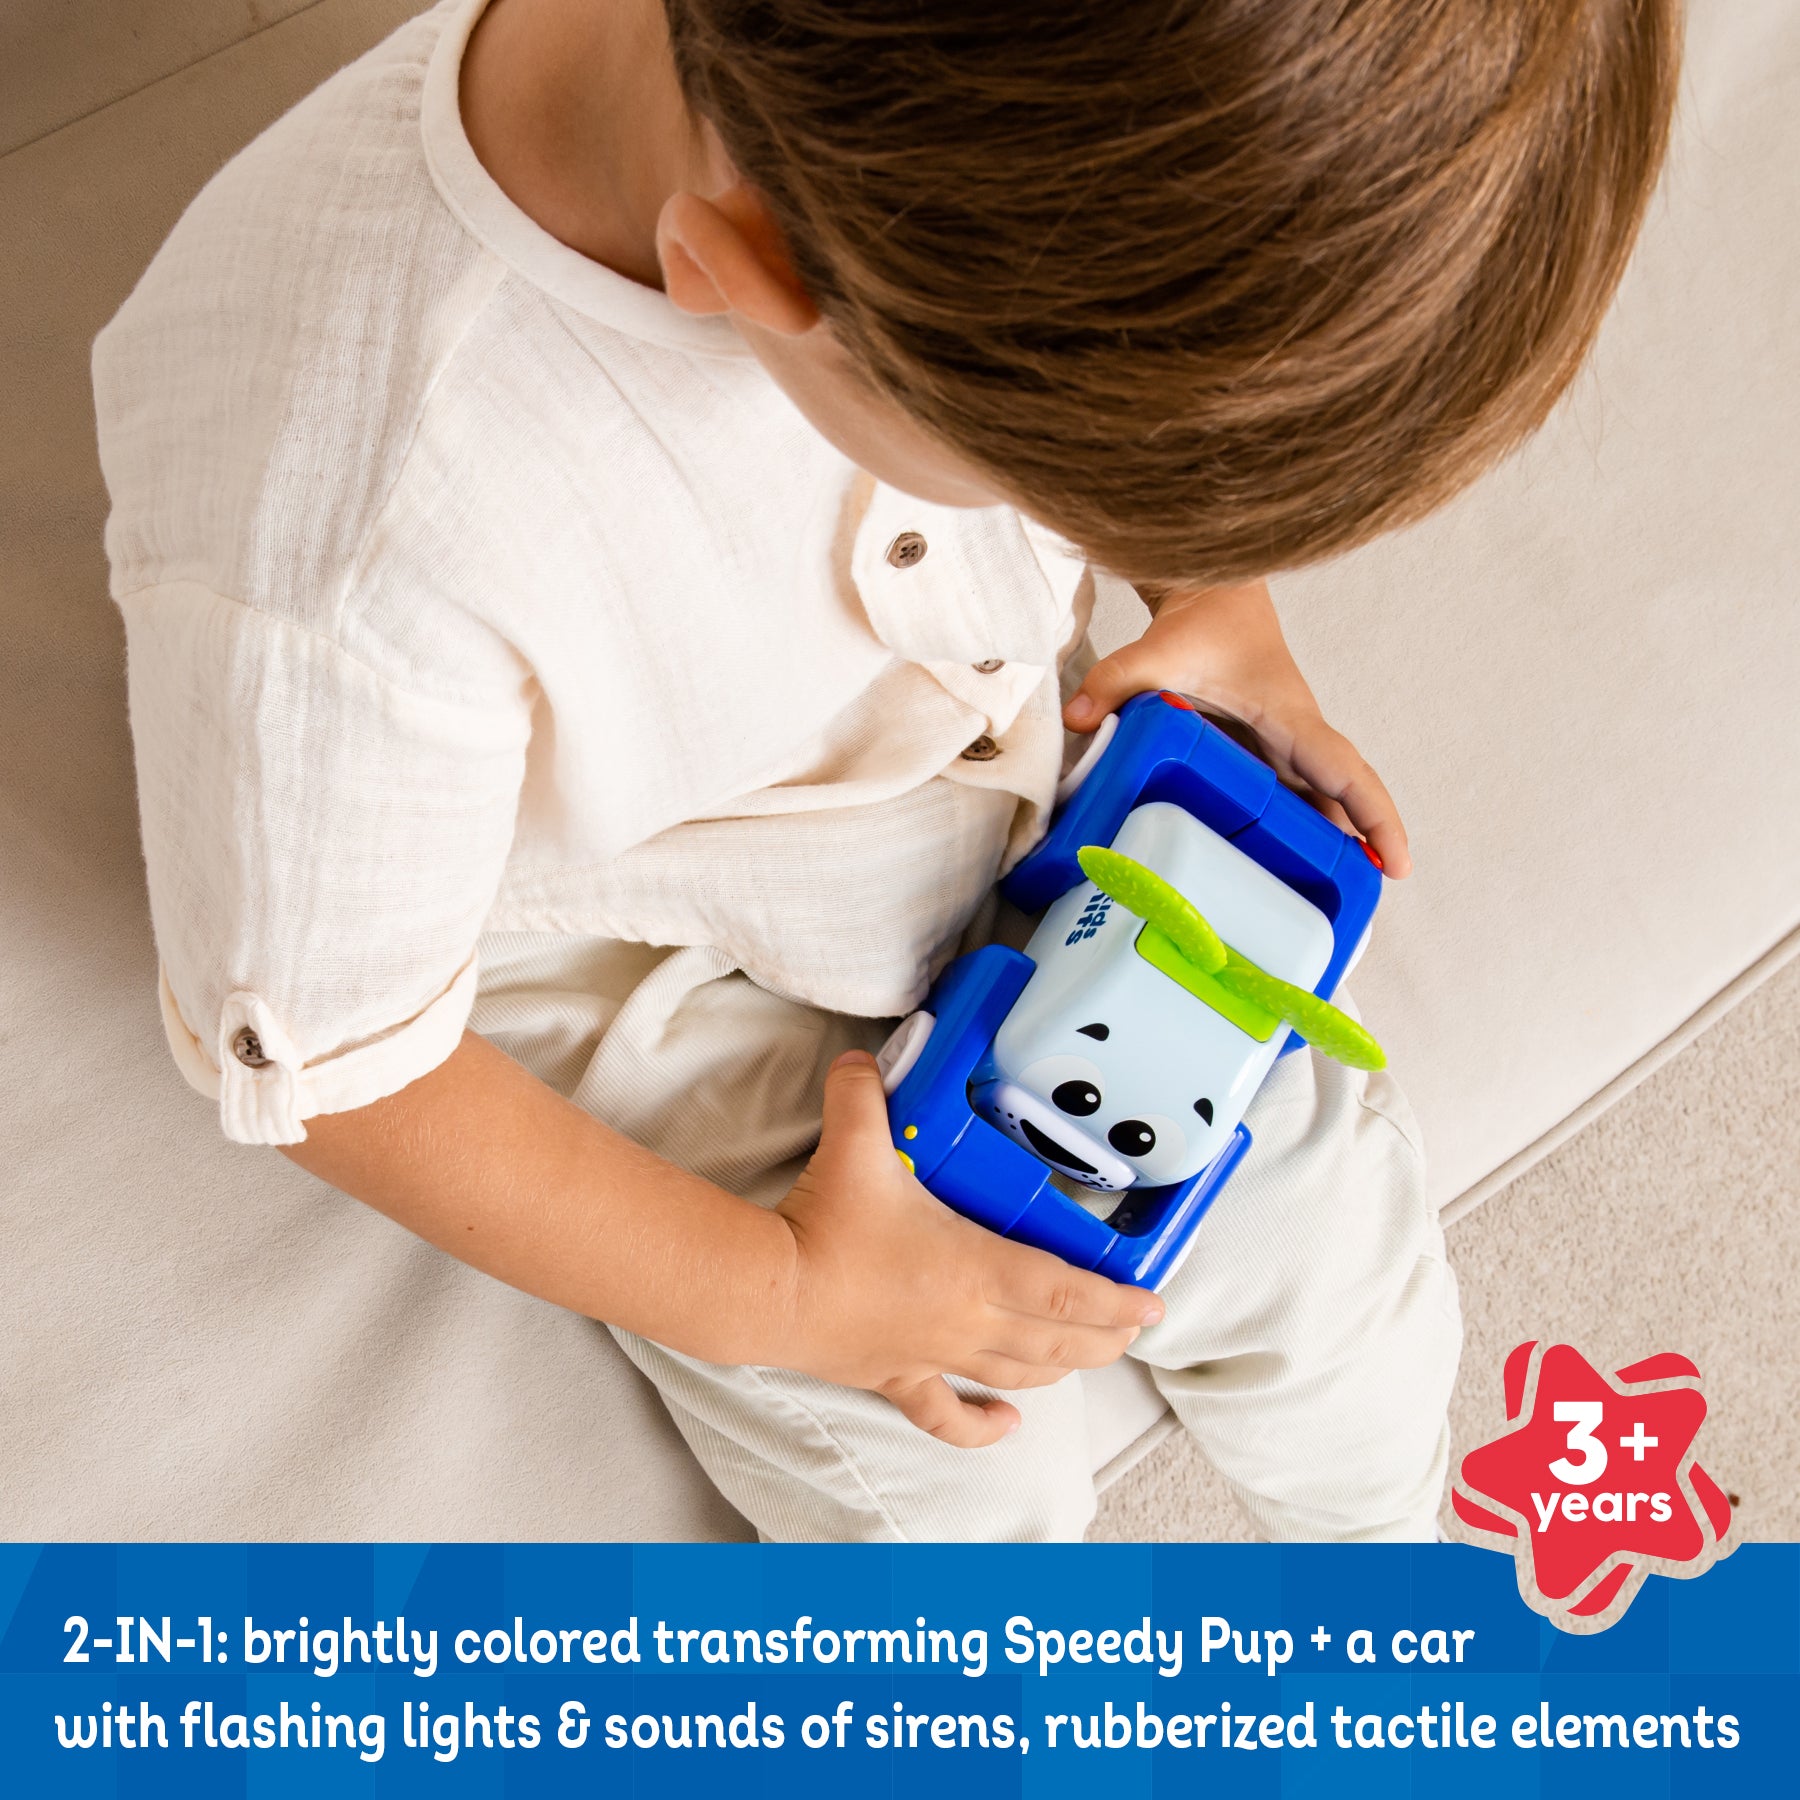 Kids Hits Speedy Pup TransformMates: A Vibrant and Imaginative Delight for Your Little One!